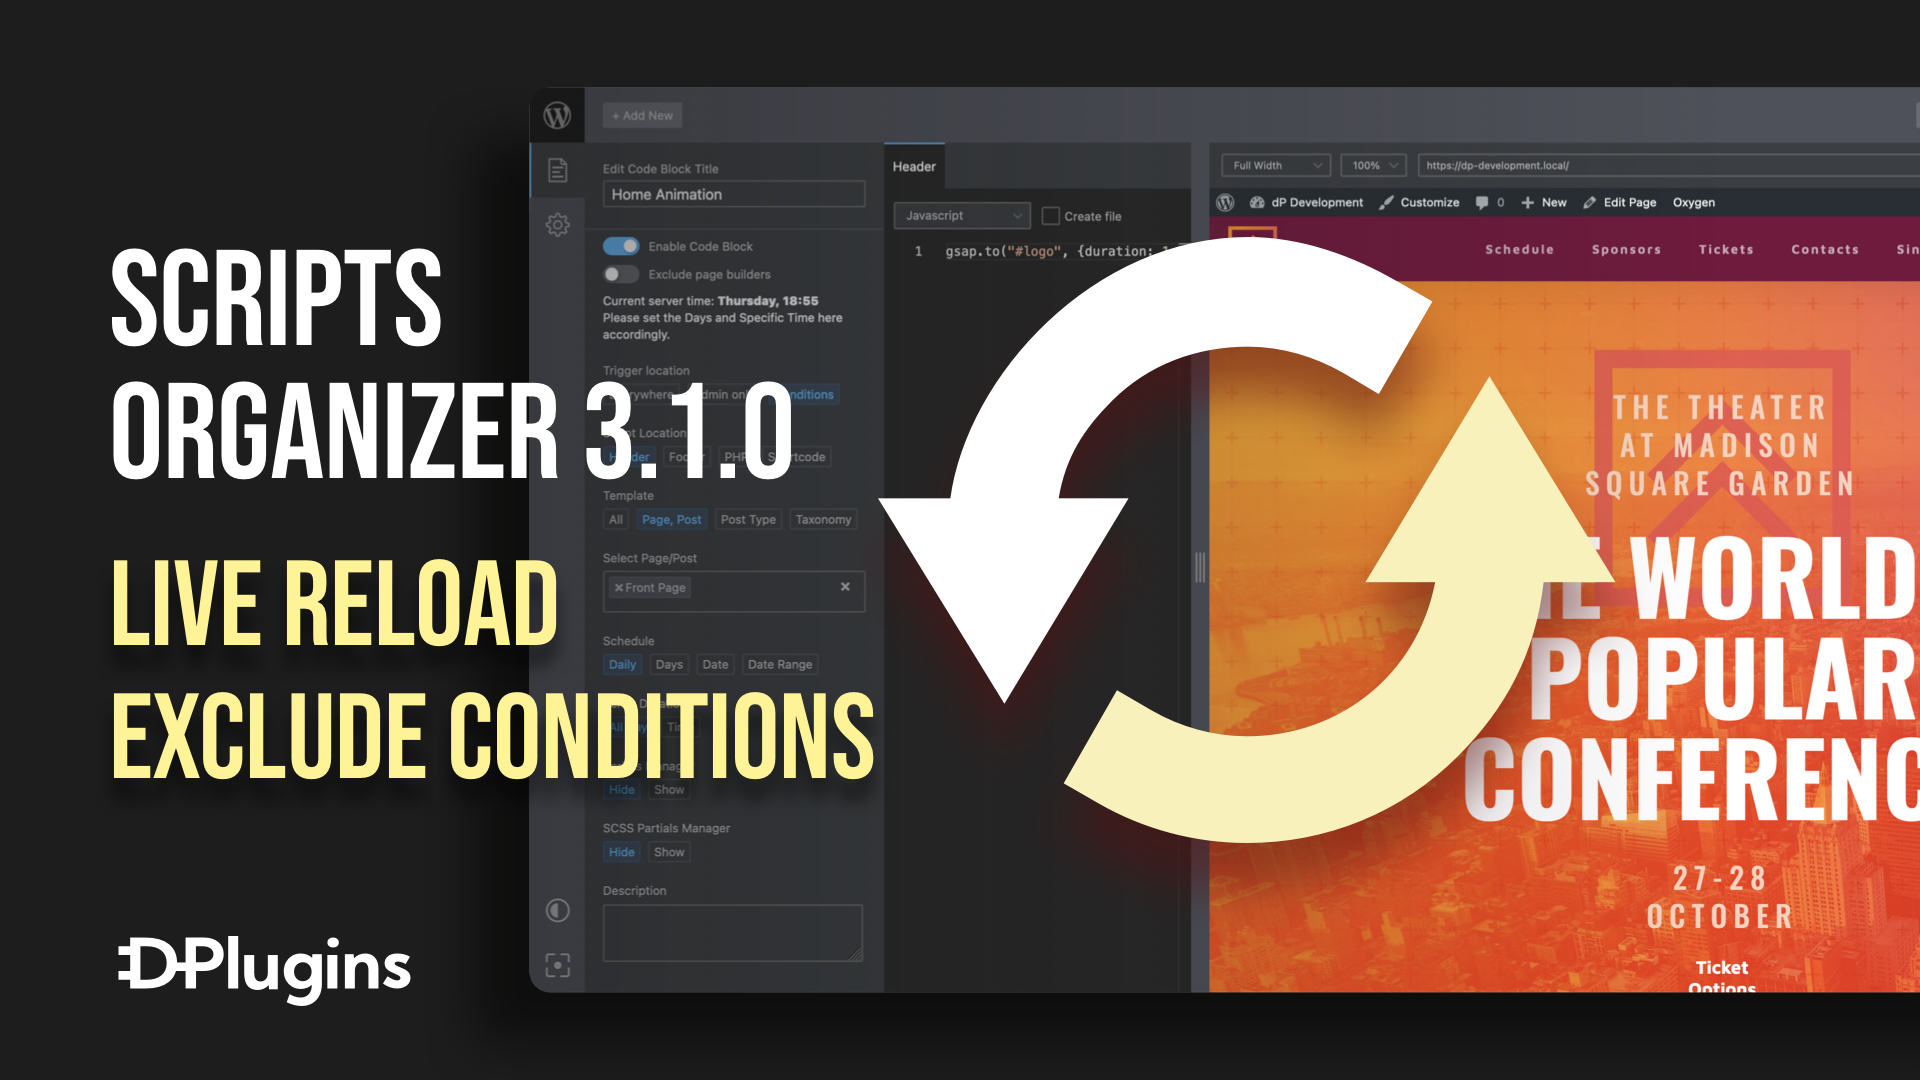 Scripts Organizer 3.1.0 Live preview and Exclude conditions